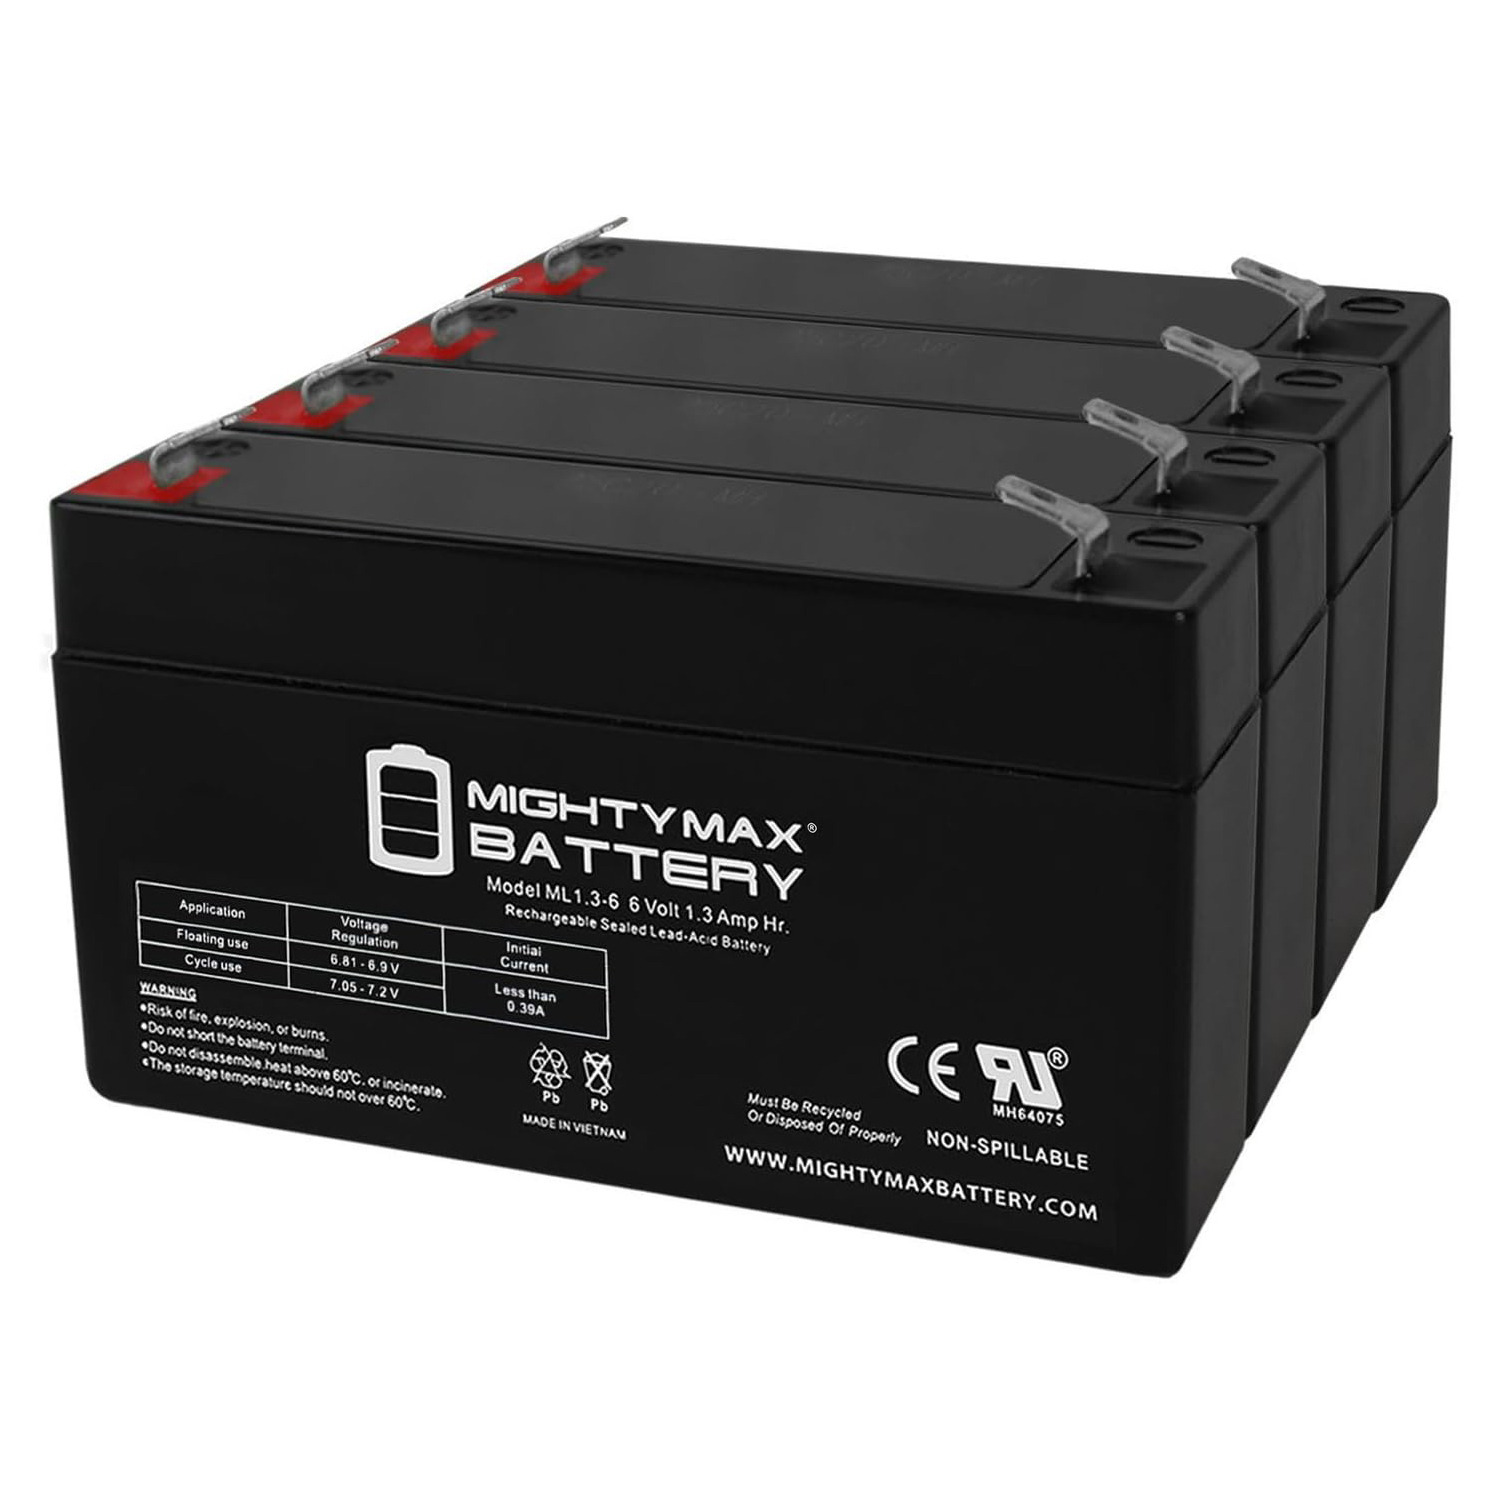 Replacement for PE6V1.2 Replacement Battery - 4 Pack